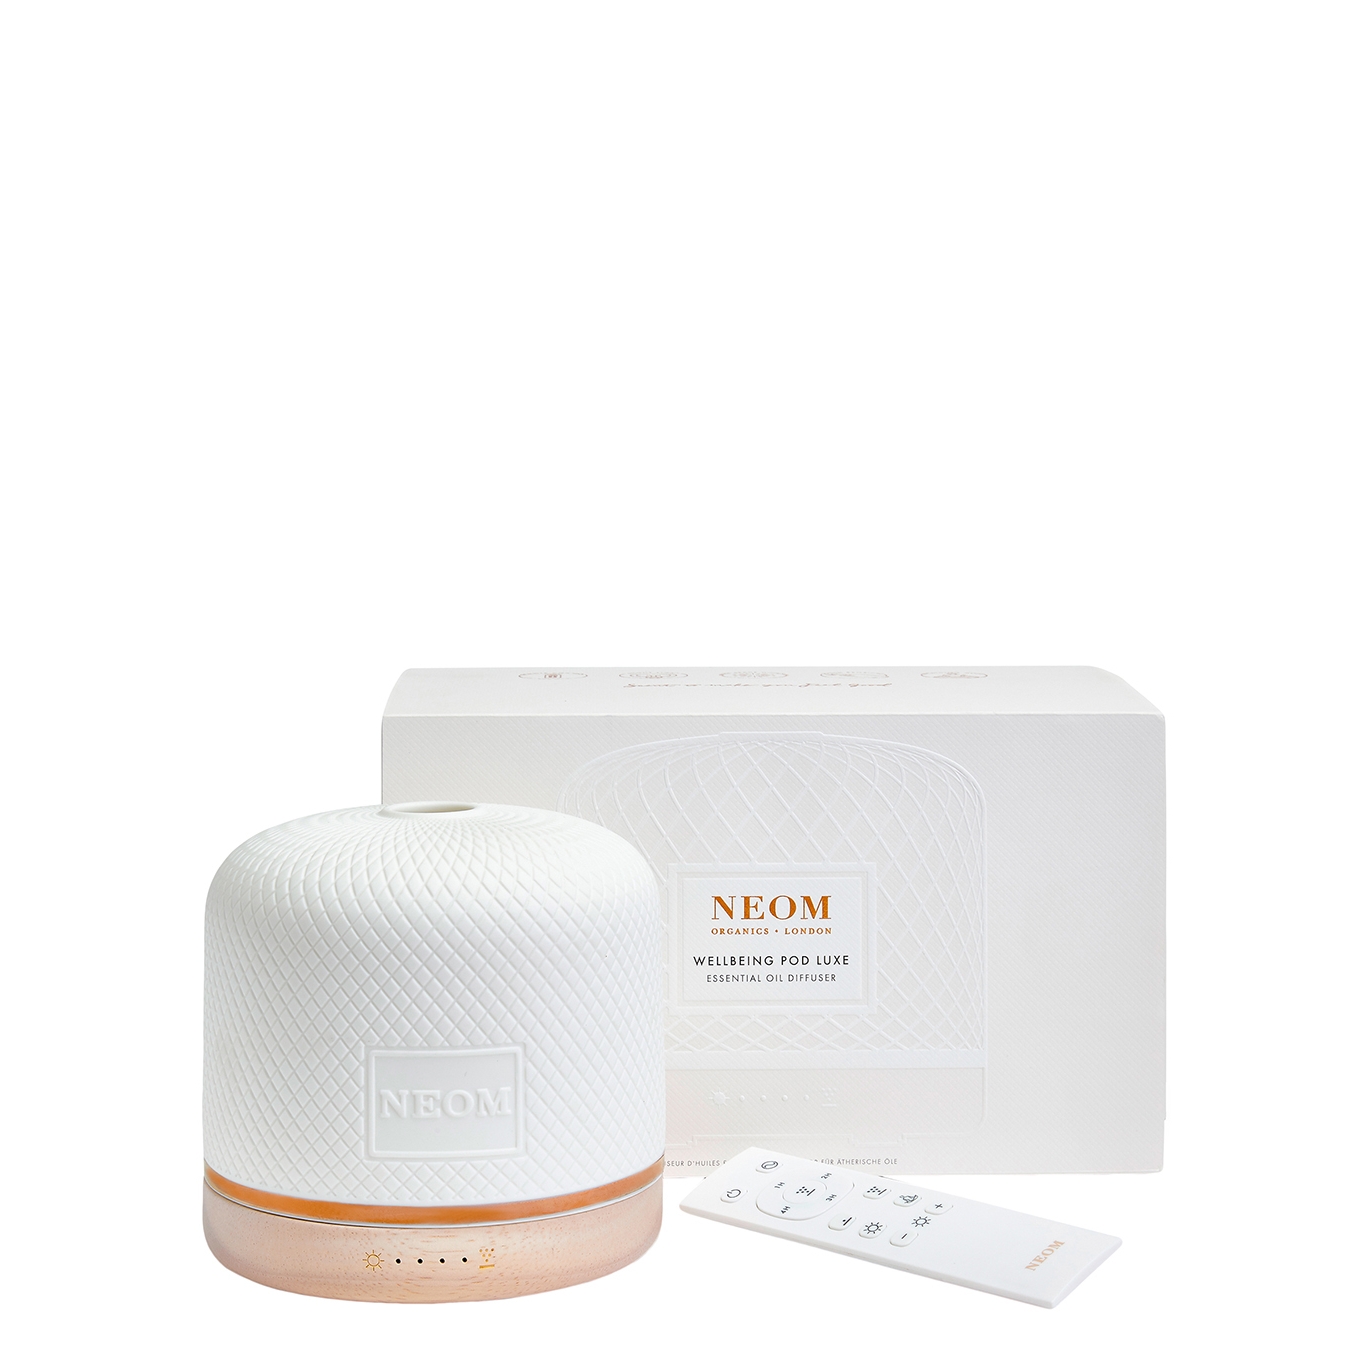 Neom Wellbeing Pod Luxe - Essential Oil Diffuser